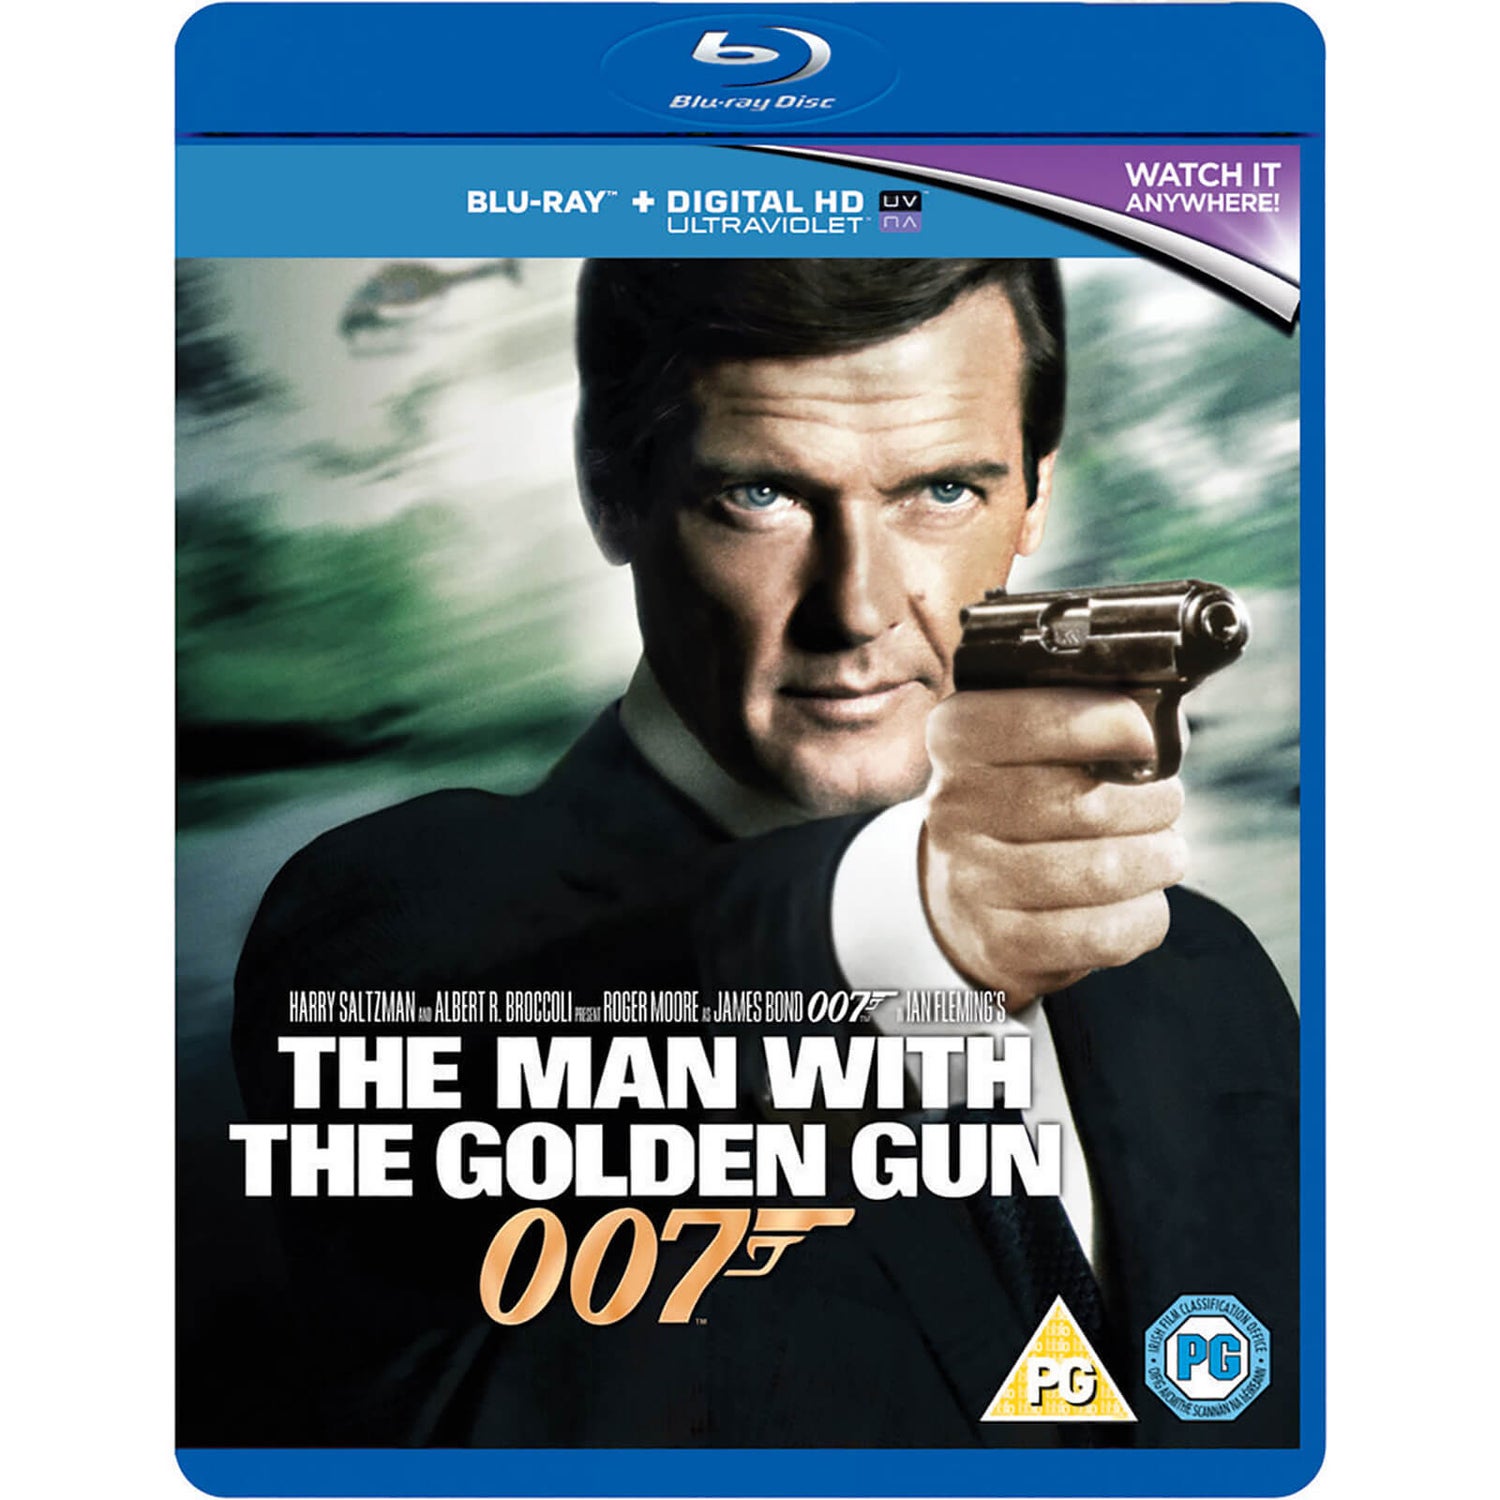 The Man With A Golden Gun (Includes HD UltraViolet Copy)